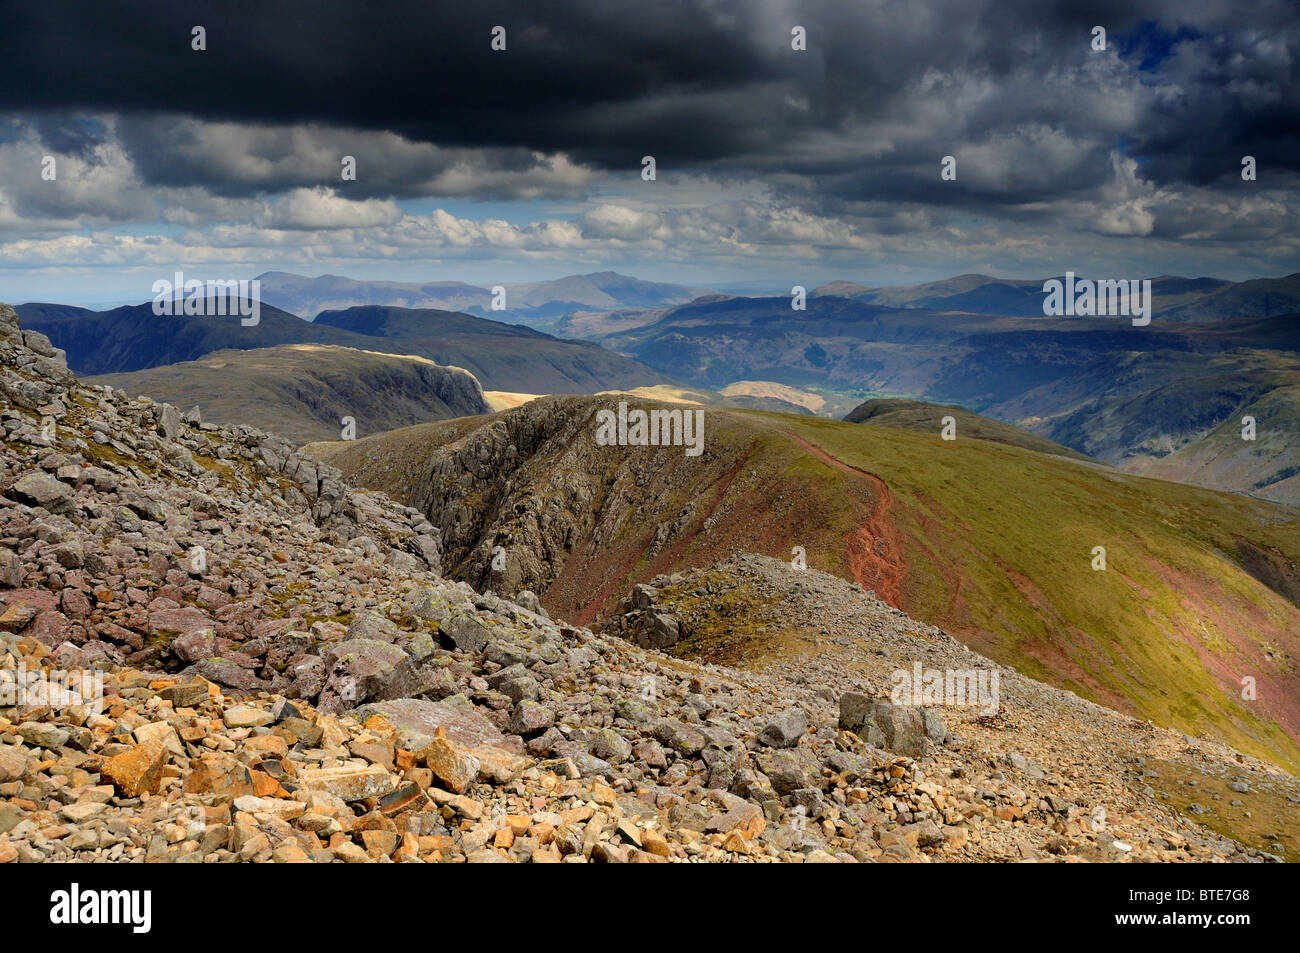 View on a stormy day from Great Gable towards Green Gable in the English Lake District Stock Photo